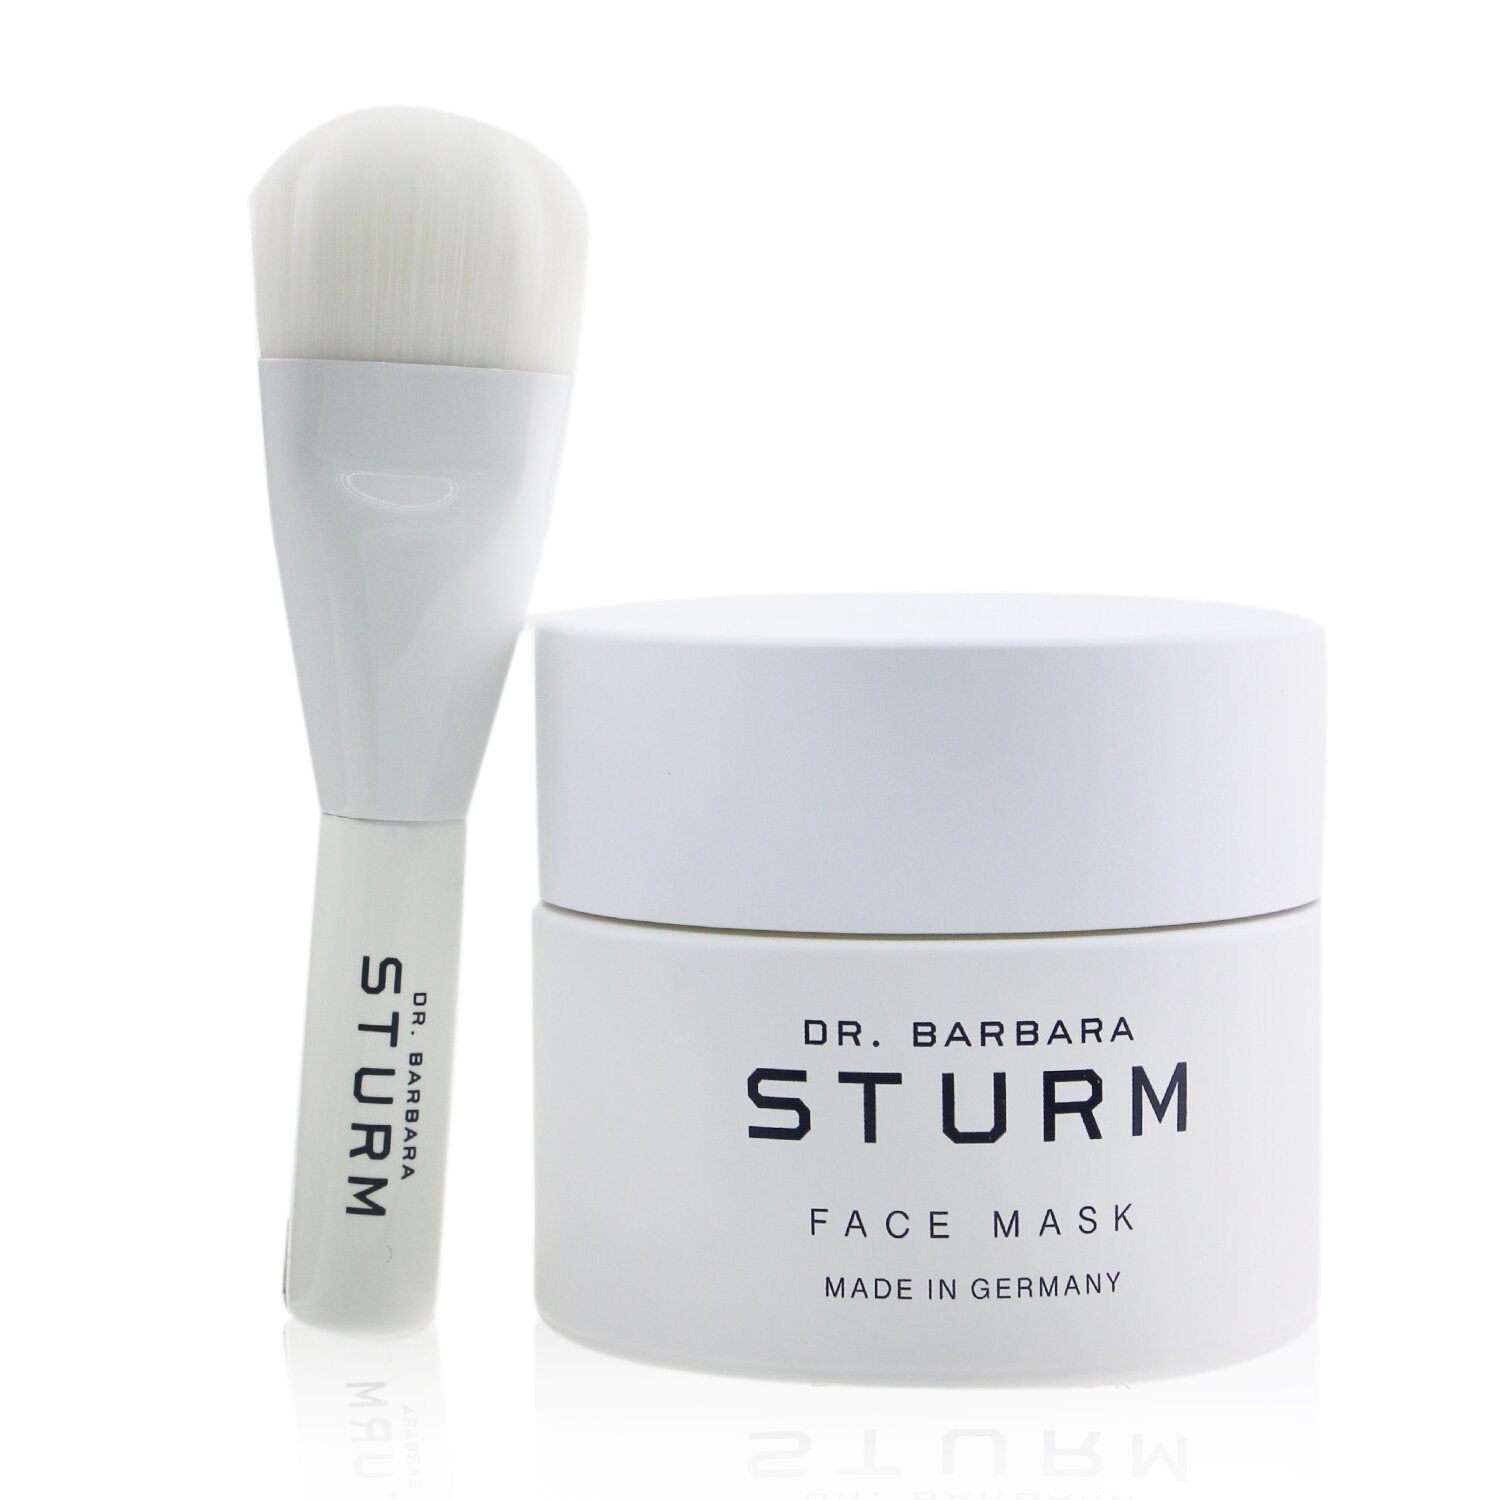 A DR. BARBARA STURM - Face Mask 33773/402160 50ml/1.69oz container with a white label next to a gray and white application brush, set against a white background.